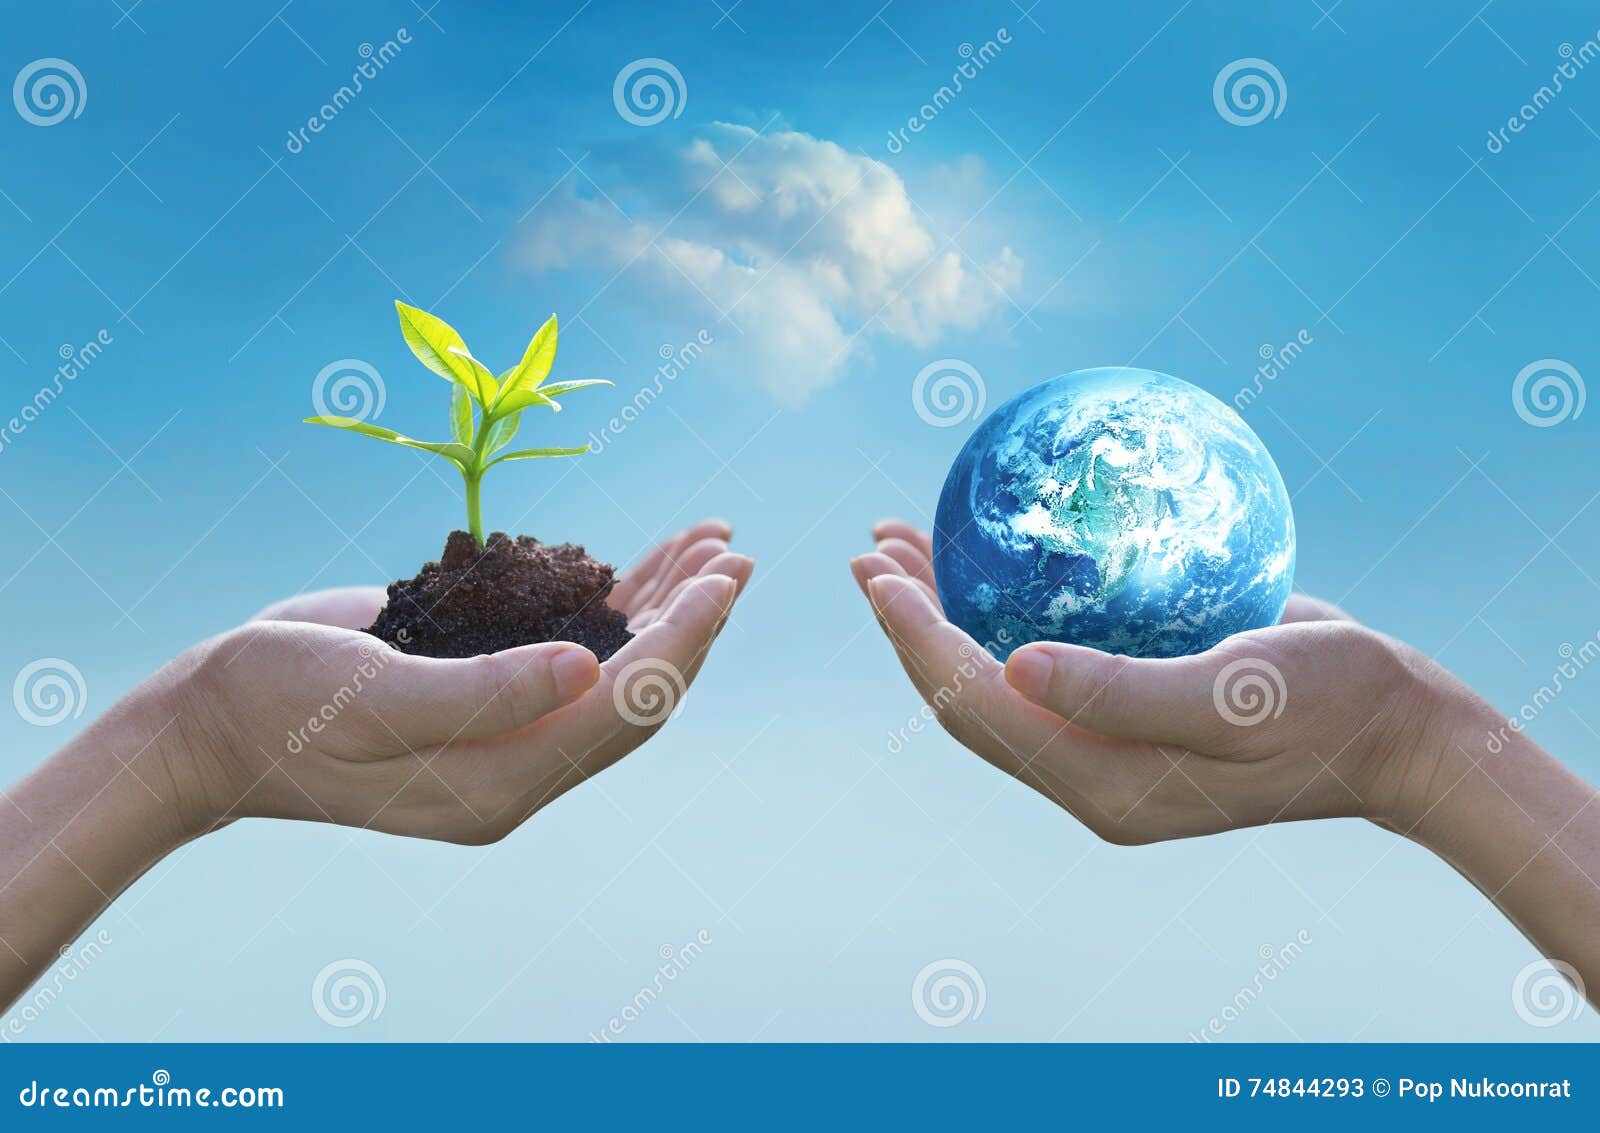 holding earth and green tree in hands, world environment day concept, saving growing young tree